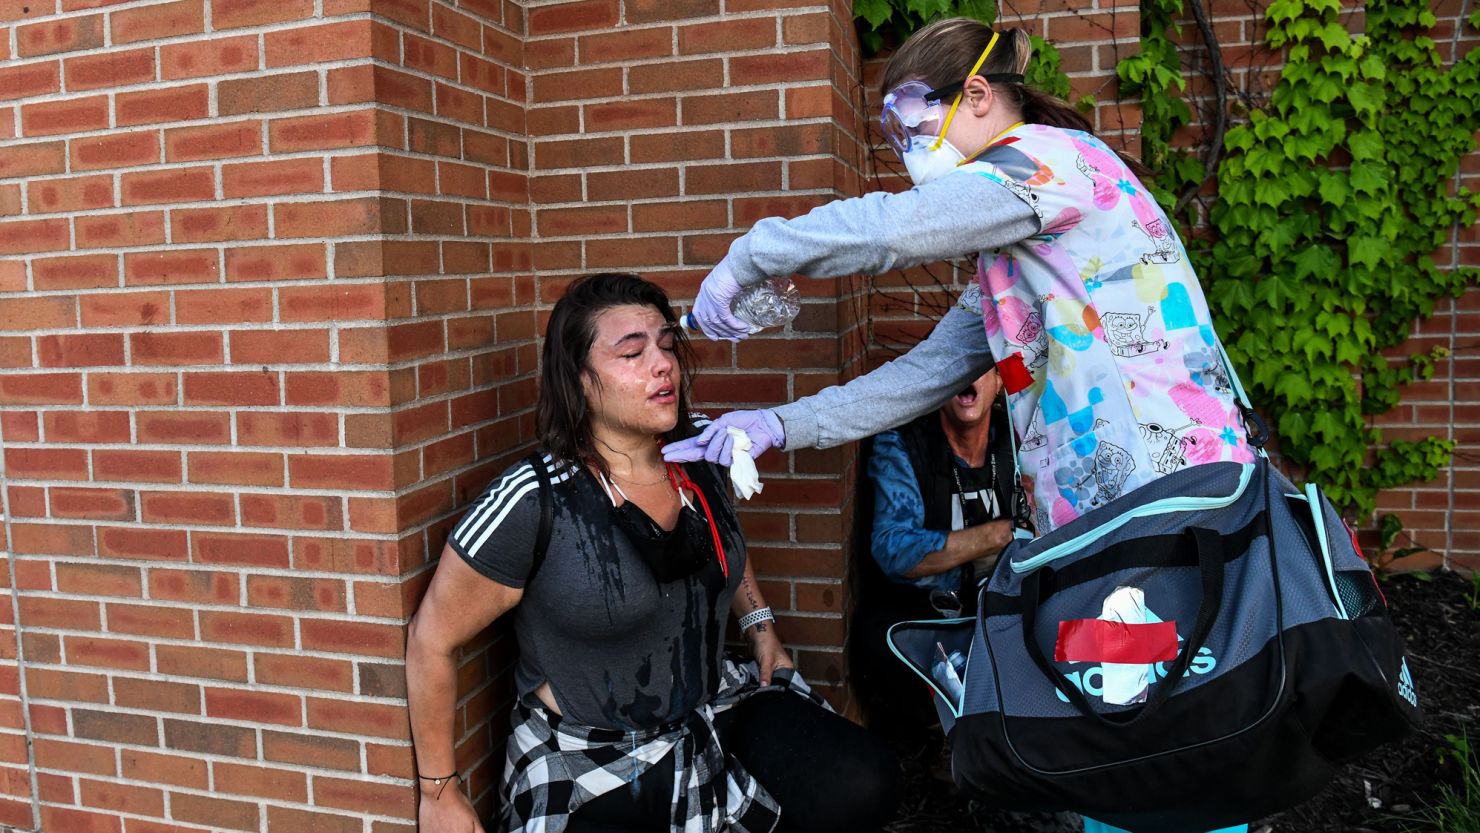 A medic protester pours water on a woman's face after police started firing tear gas and rubber bullets on May 30 in Minneapolis during a demonstration calling for justice for George Floyd.